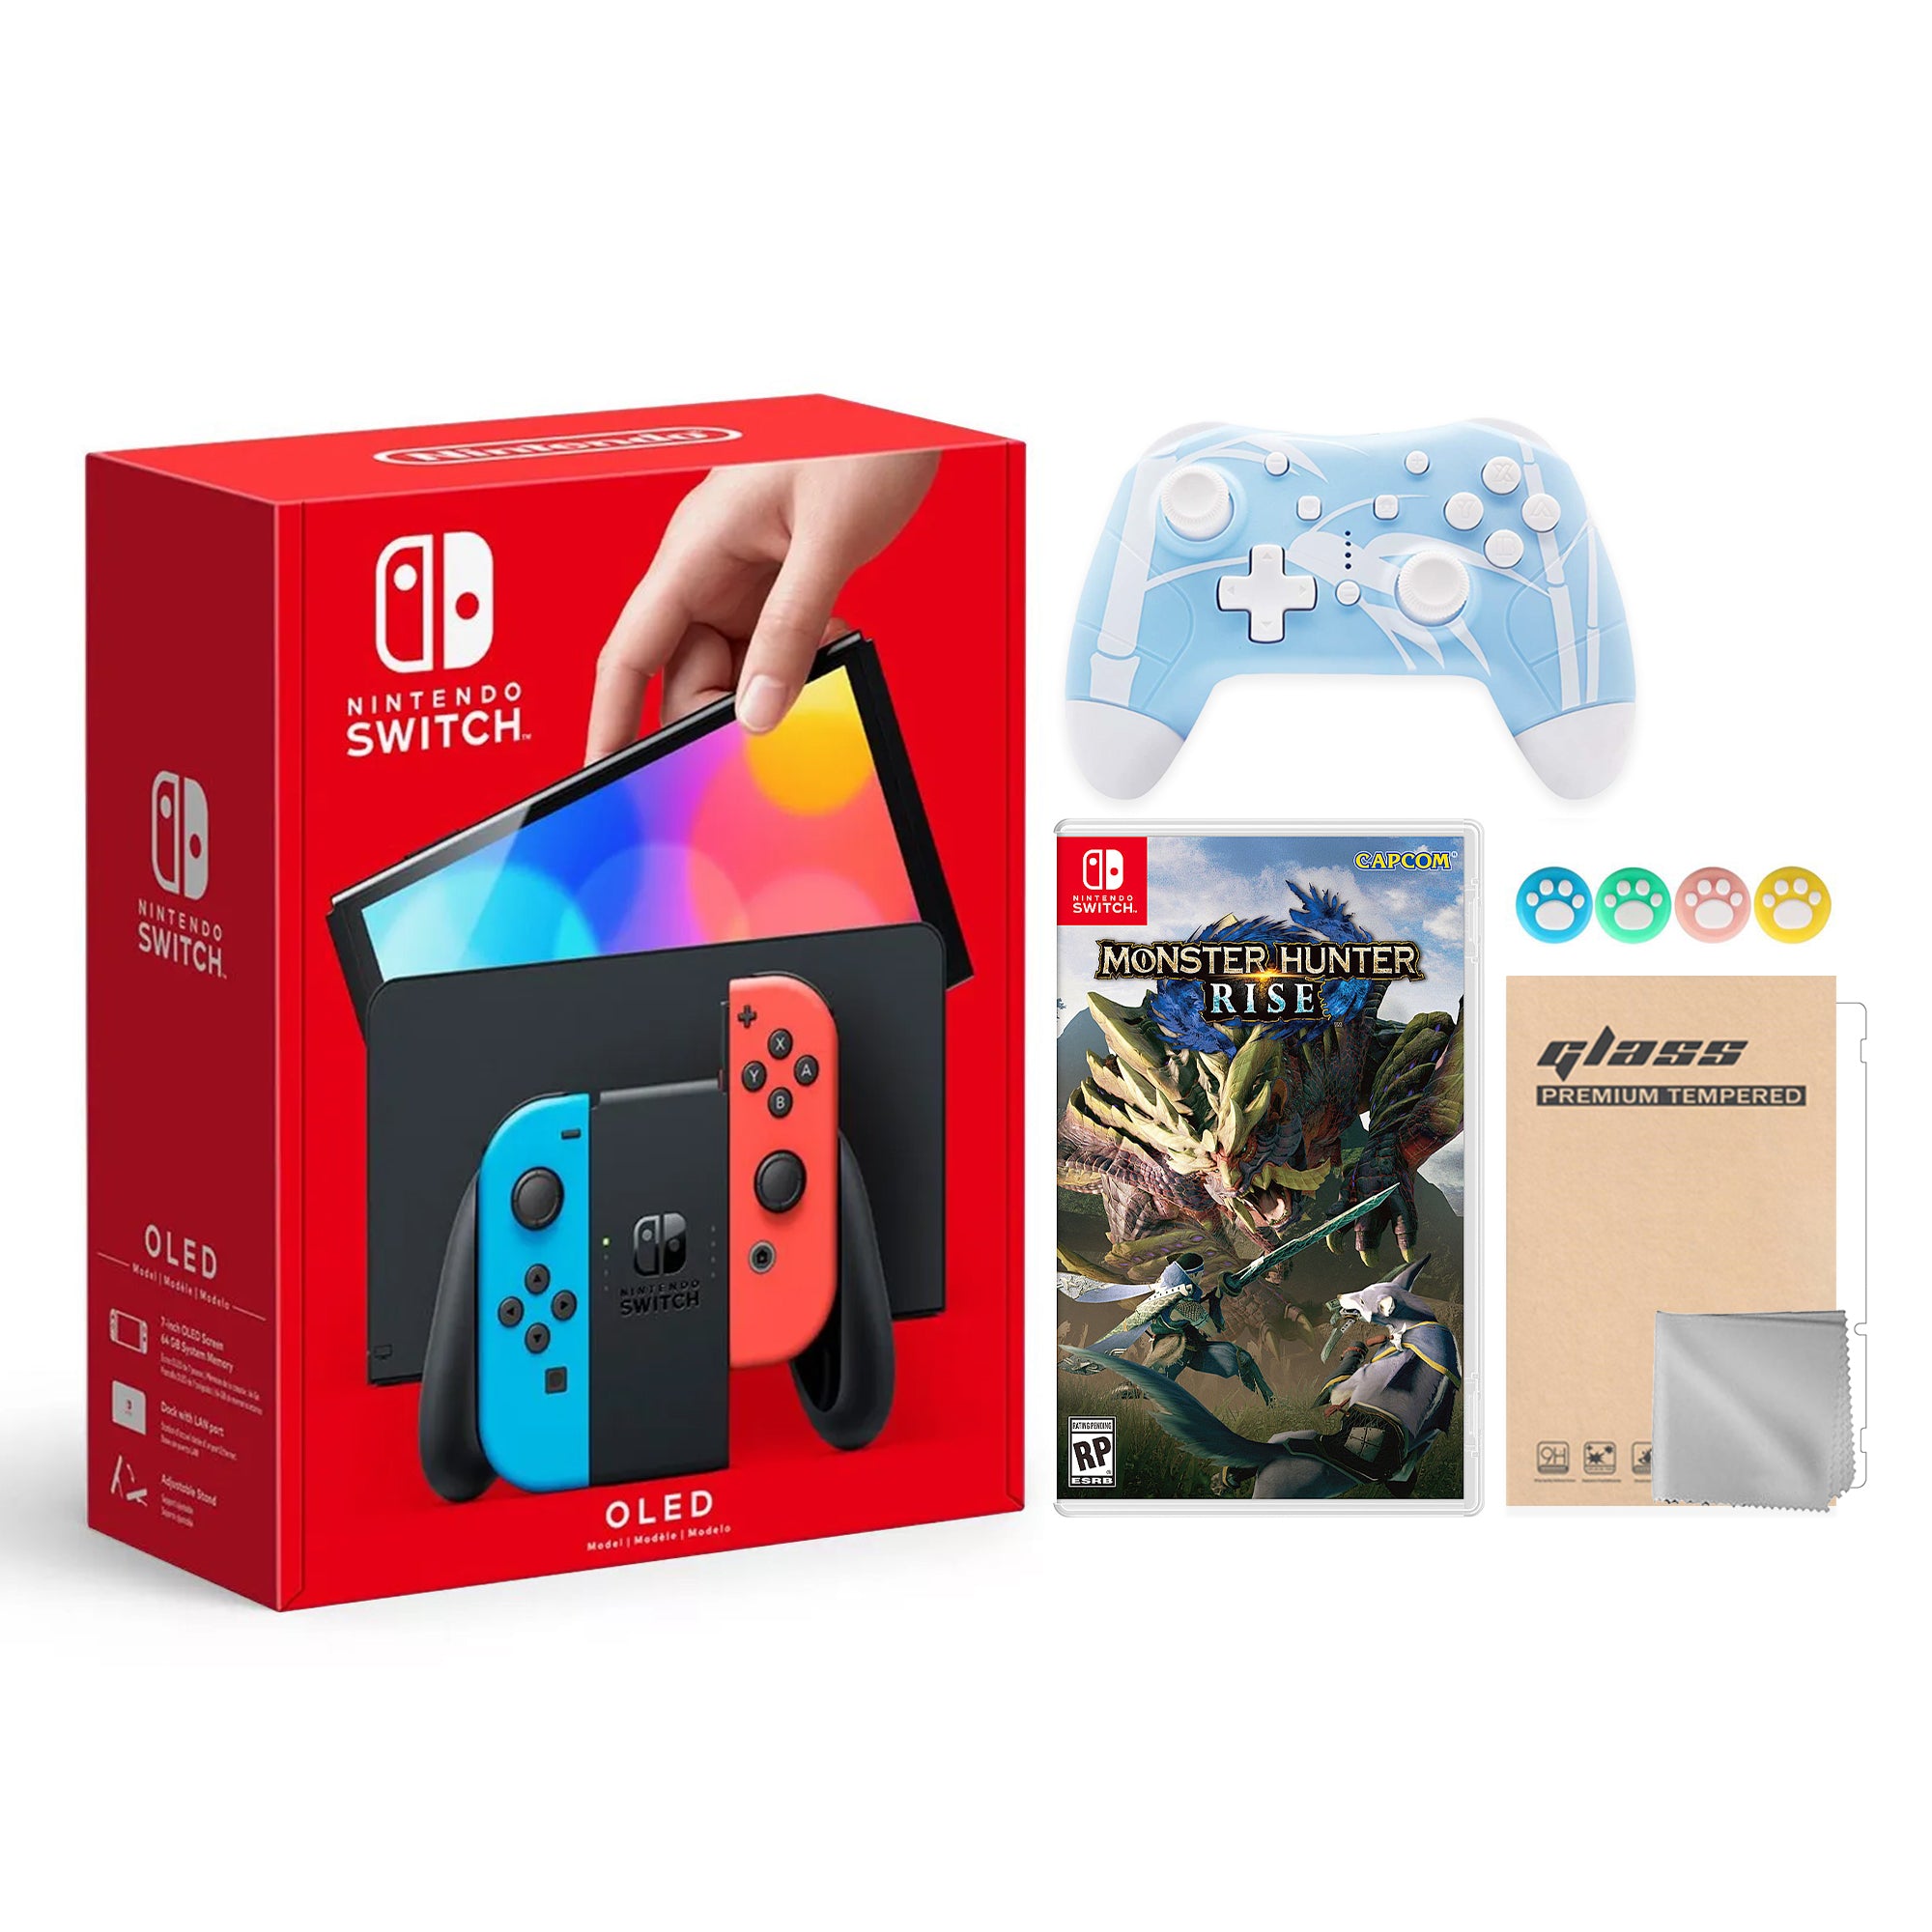 2021 New Nintendo Switch OLED Model Neon Red & Blue Joy Con 64GB Console HD Screen & LAN-Port Dock with Monster Hunter: Rise And Mytrix Wireless Switch Pro Controller and Accessories